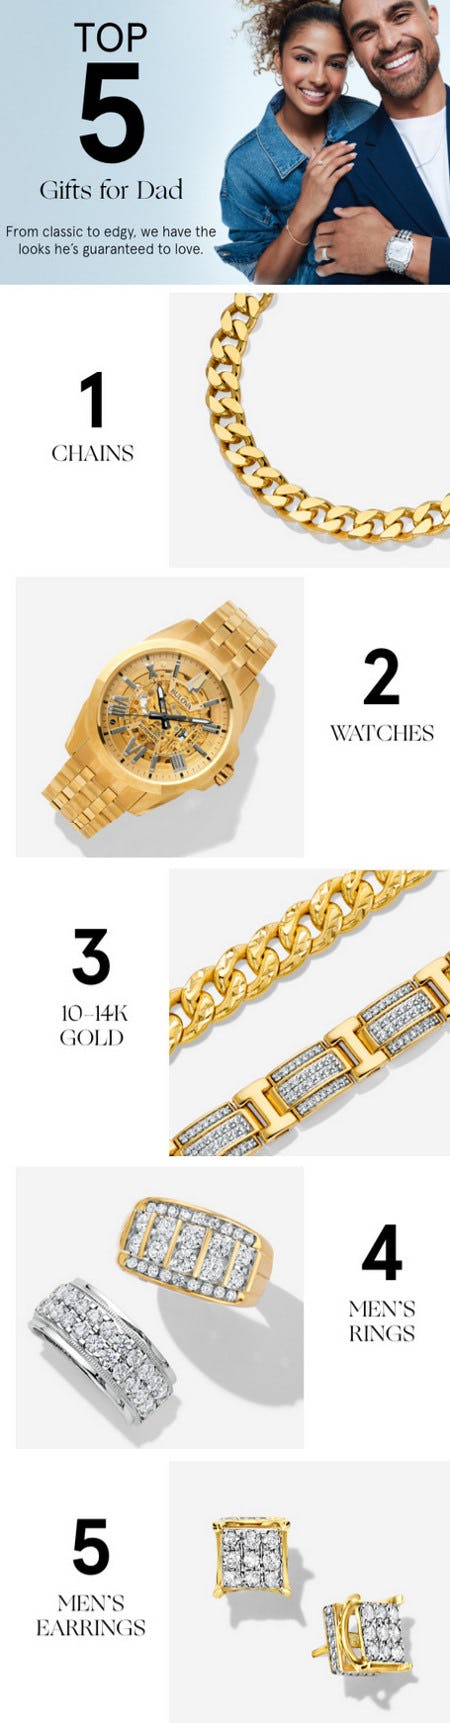 Top 5 Gifts for Dad from Zales The Diamond Store